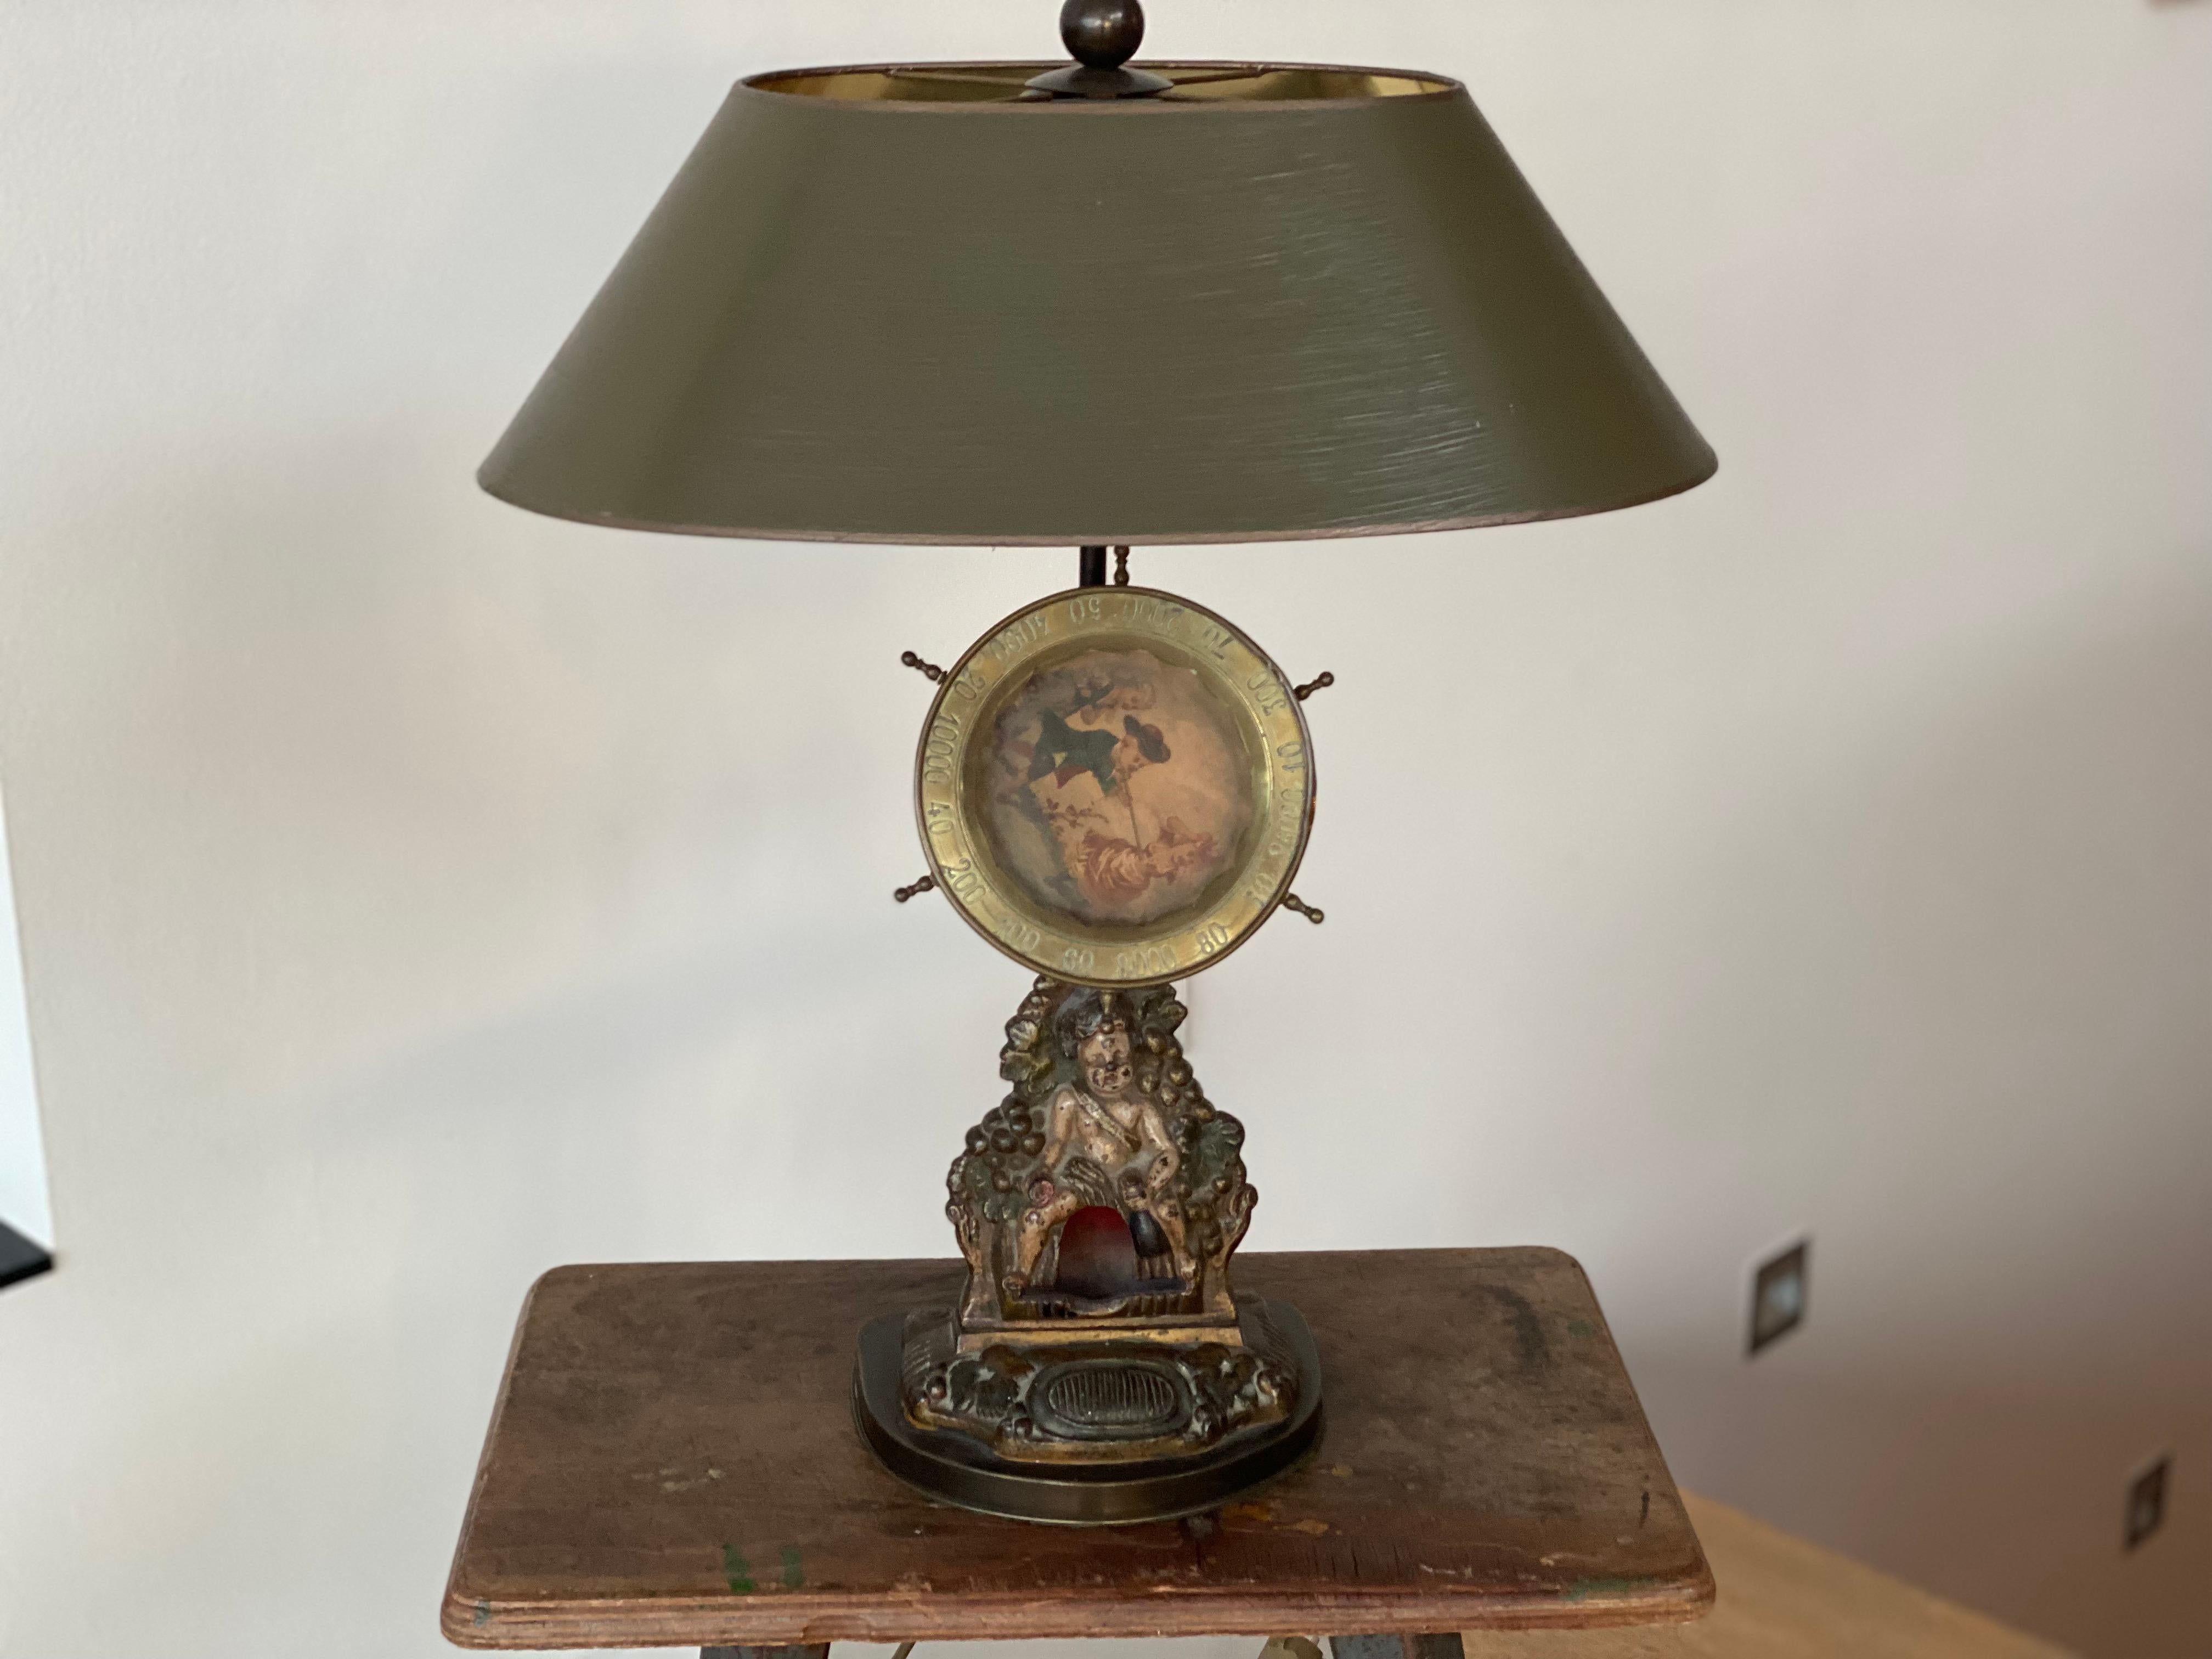 A cast-iron match dispenser serves as a base for this decorative table lamp. The lampshade has been specially made for the lamp and has been hand-painted in a pleasant olive green. The lampshade is lined with gold from the inside, so that the light